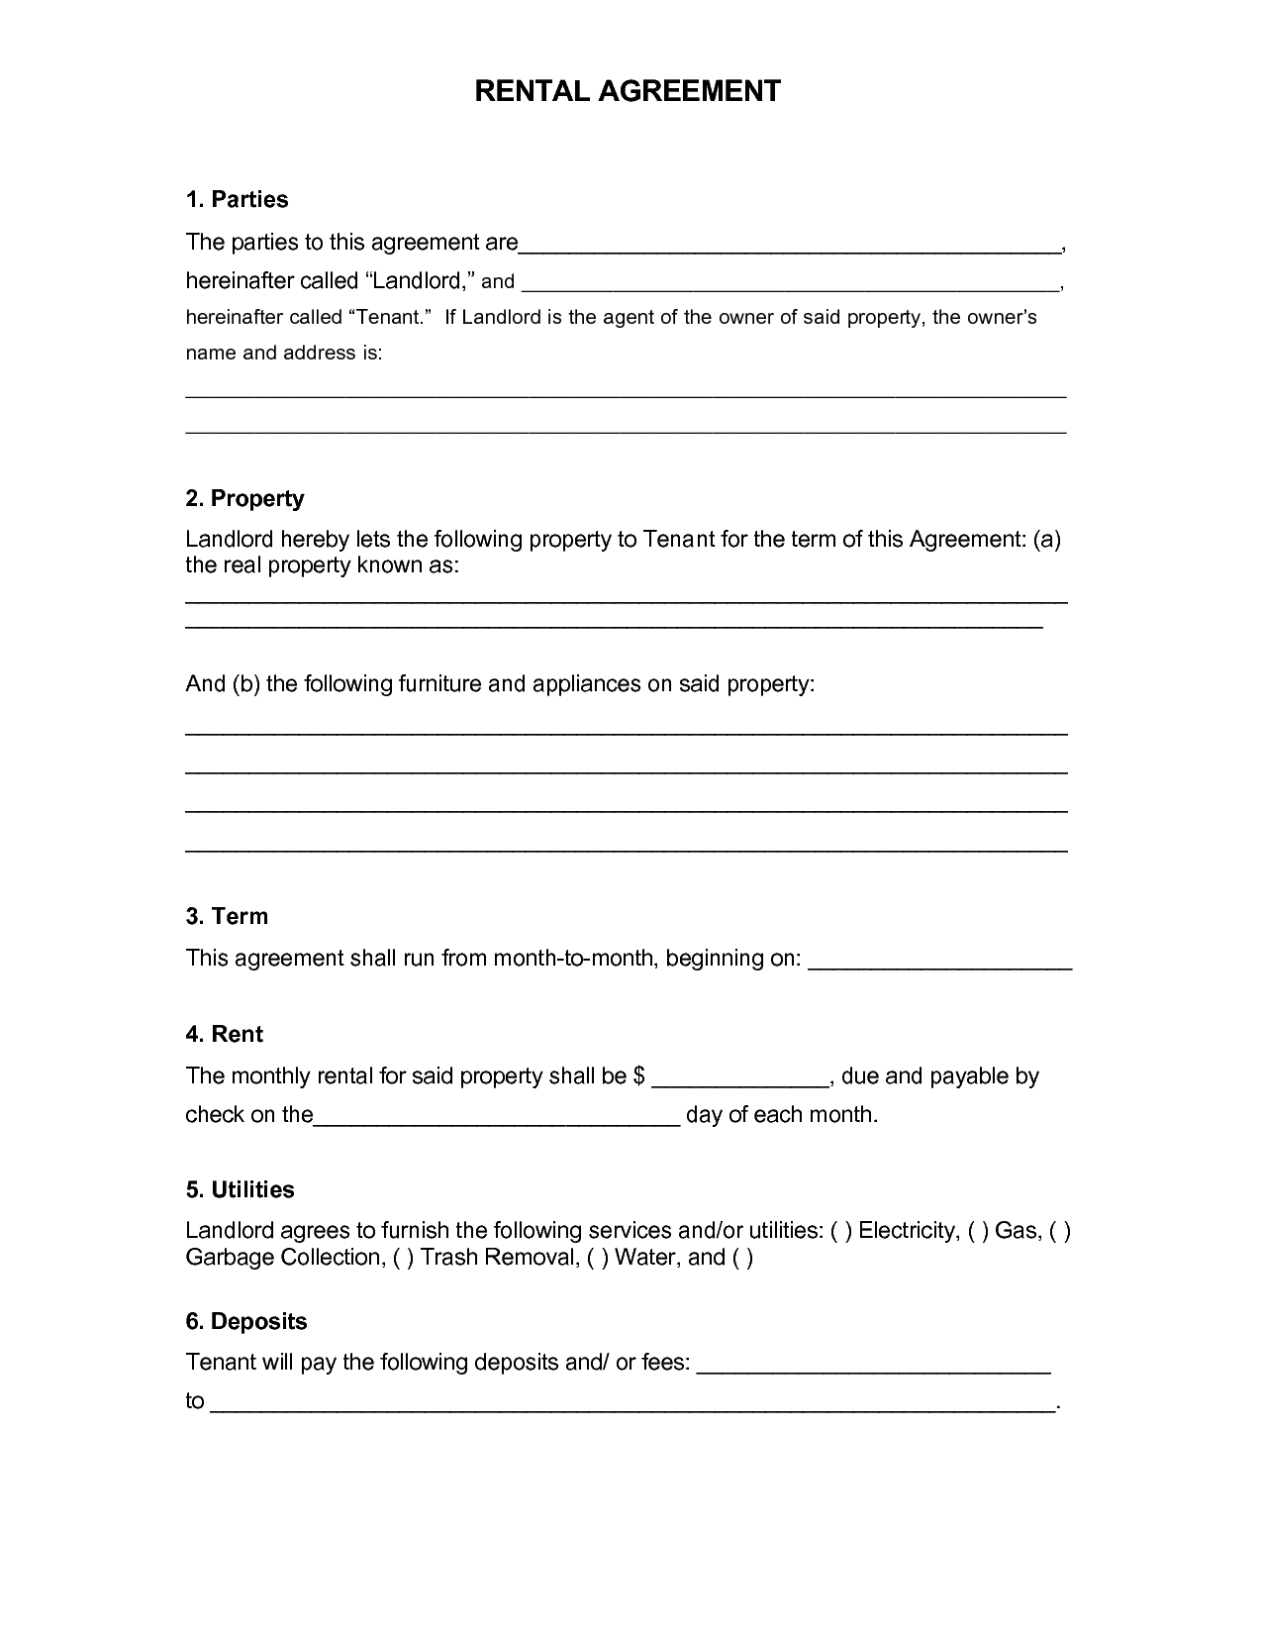 Rental Agreement Template - Free Printable Documents With Regard To Free Tenant Lease Agreement Template